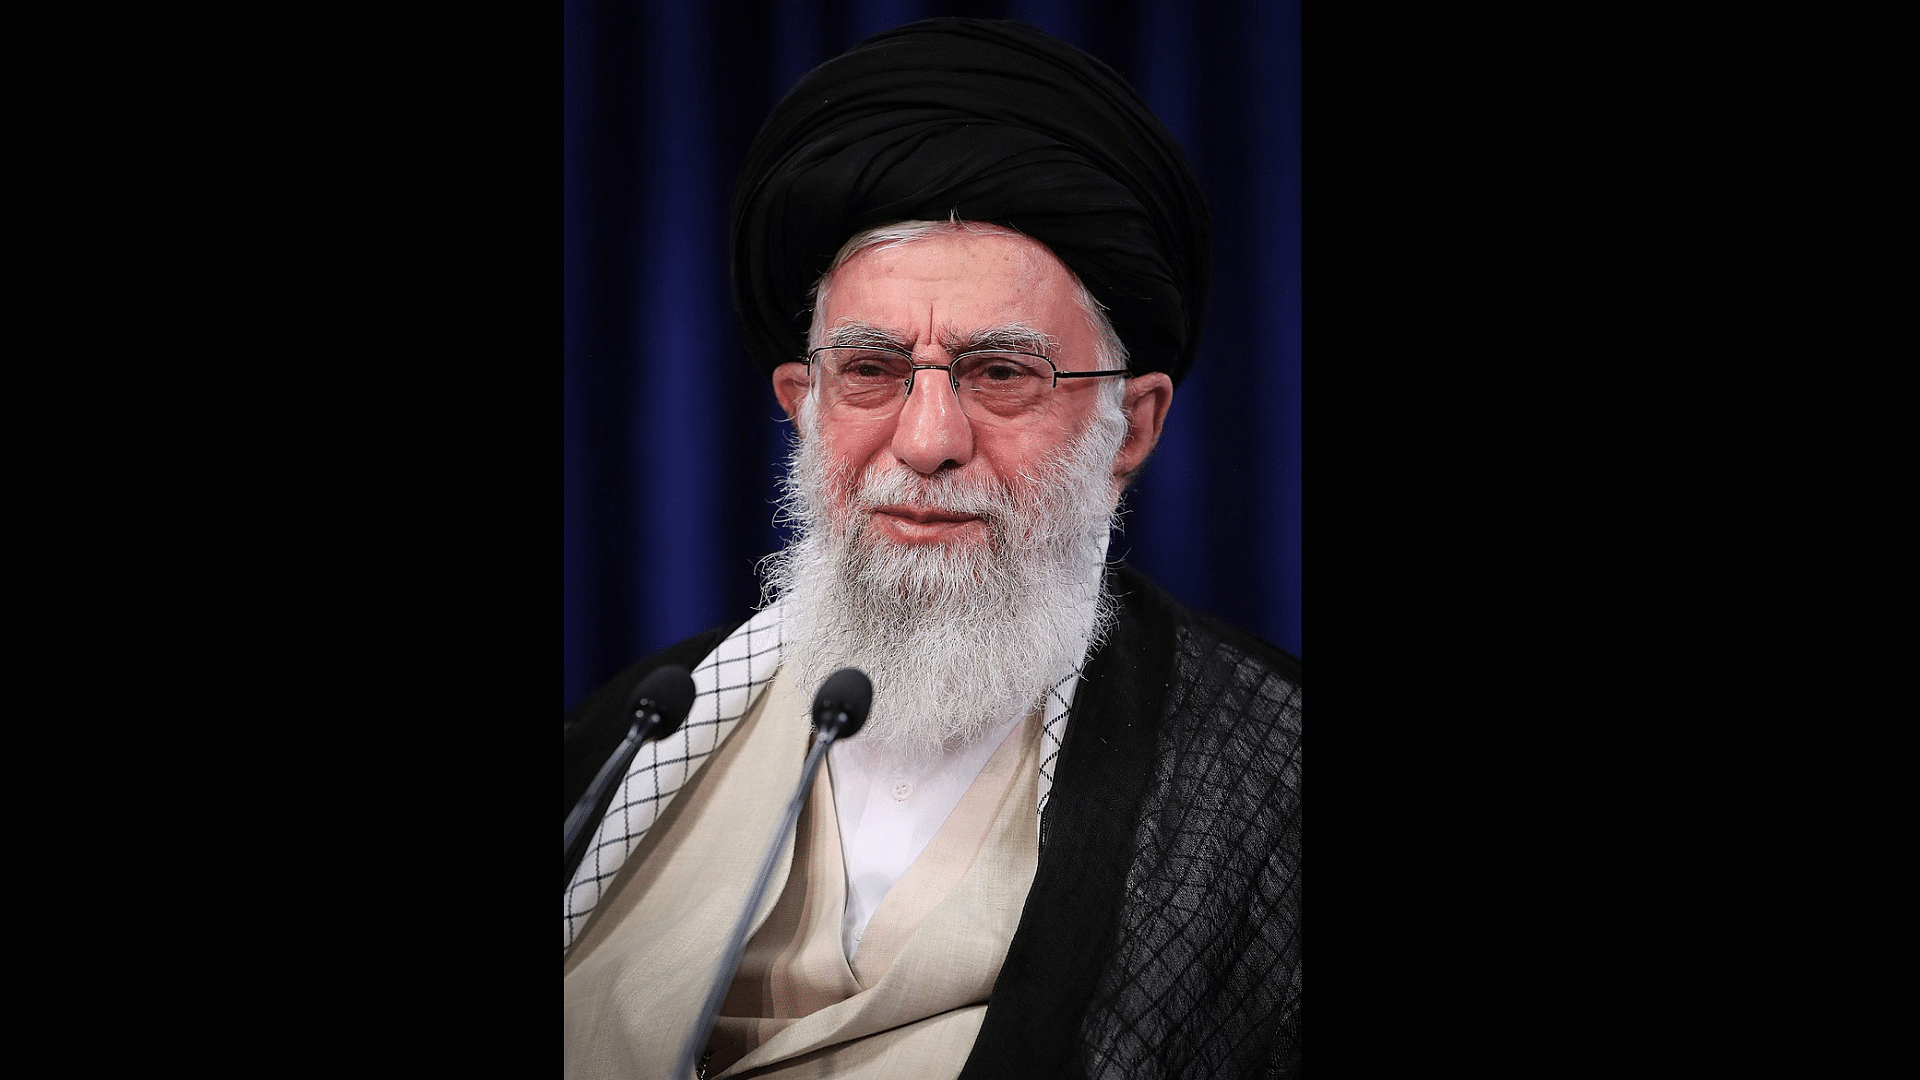 Iran’s Supreme Leader Ayatollah Ali Khamenei on Friday, 8 January, banned the country from importing US- and UK-made vaccines against COVID-19.